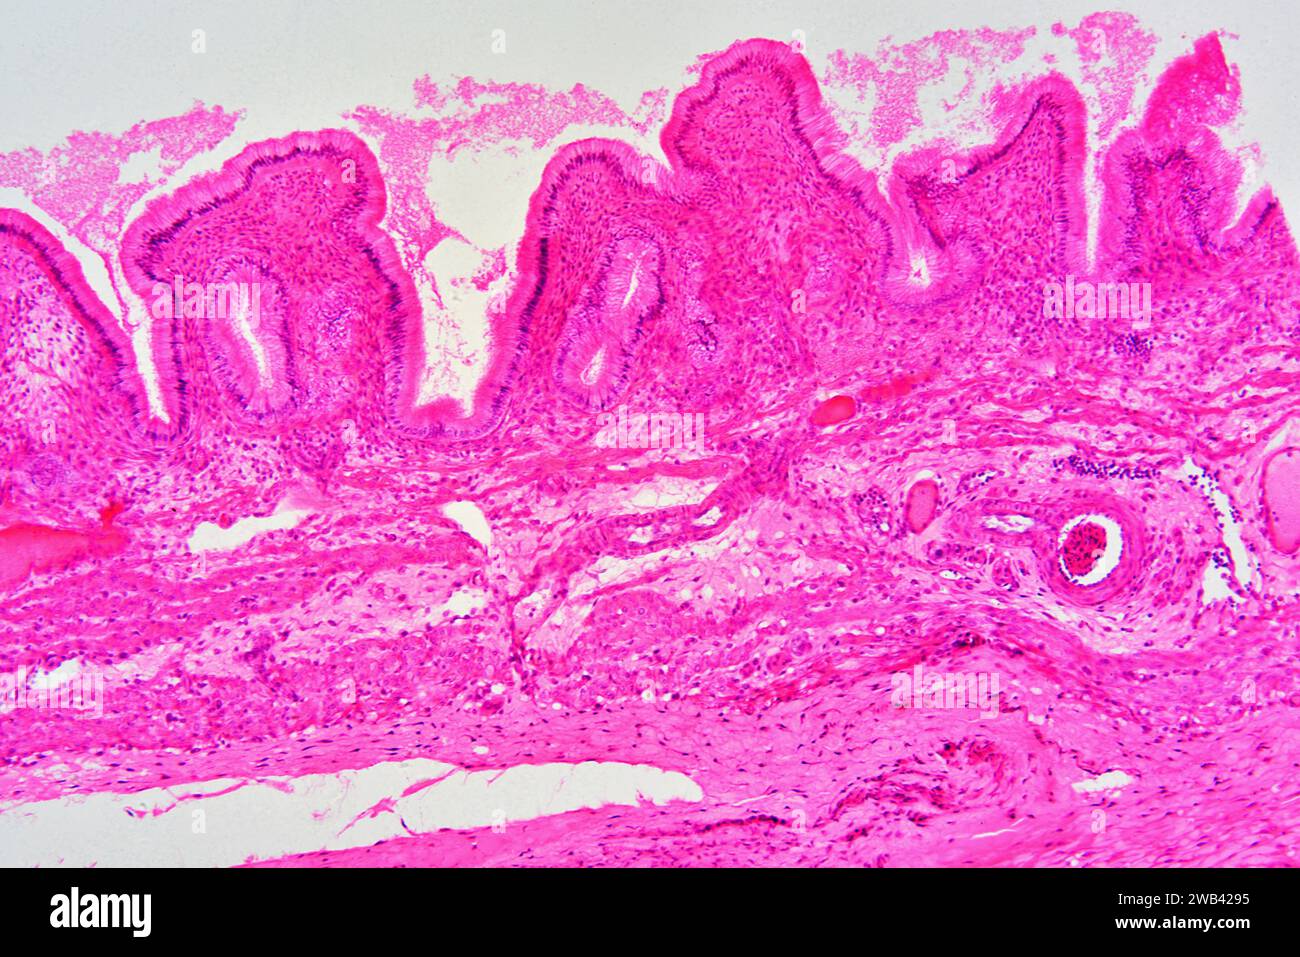 Gallbladder wall showing columnar epithelium with mucosal foldsi, connective tissue and smooth muscle fibers. Photomicrograph X30 at 10cm wide. Stock Photo